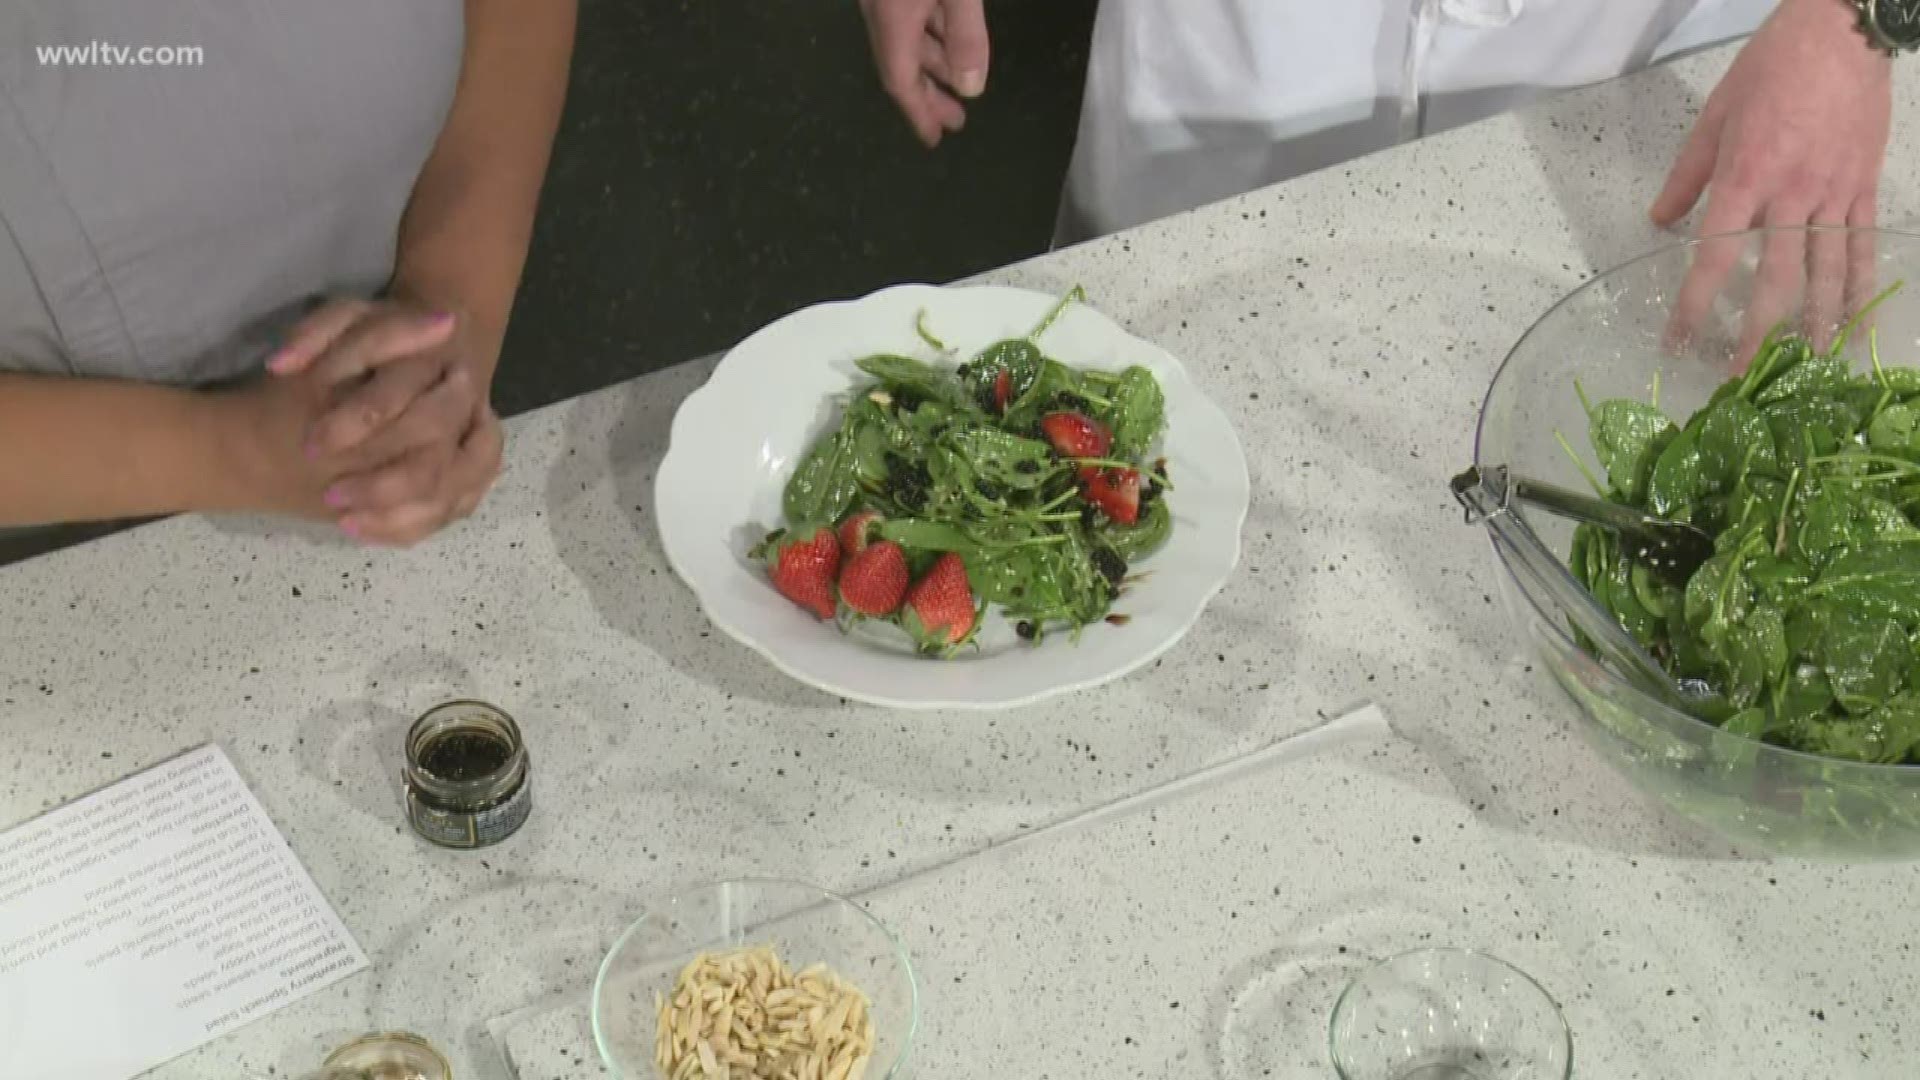 Here is a recipe of the Strawberry Spinach Salad featured on the Eyewitness Morning News Sunday.